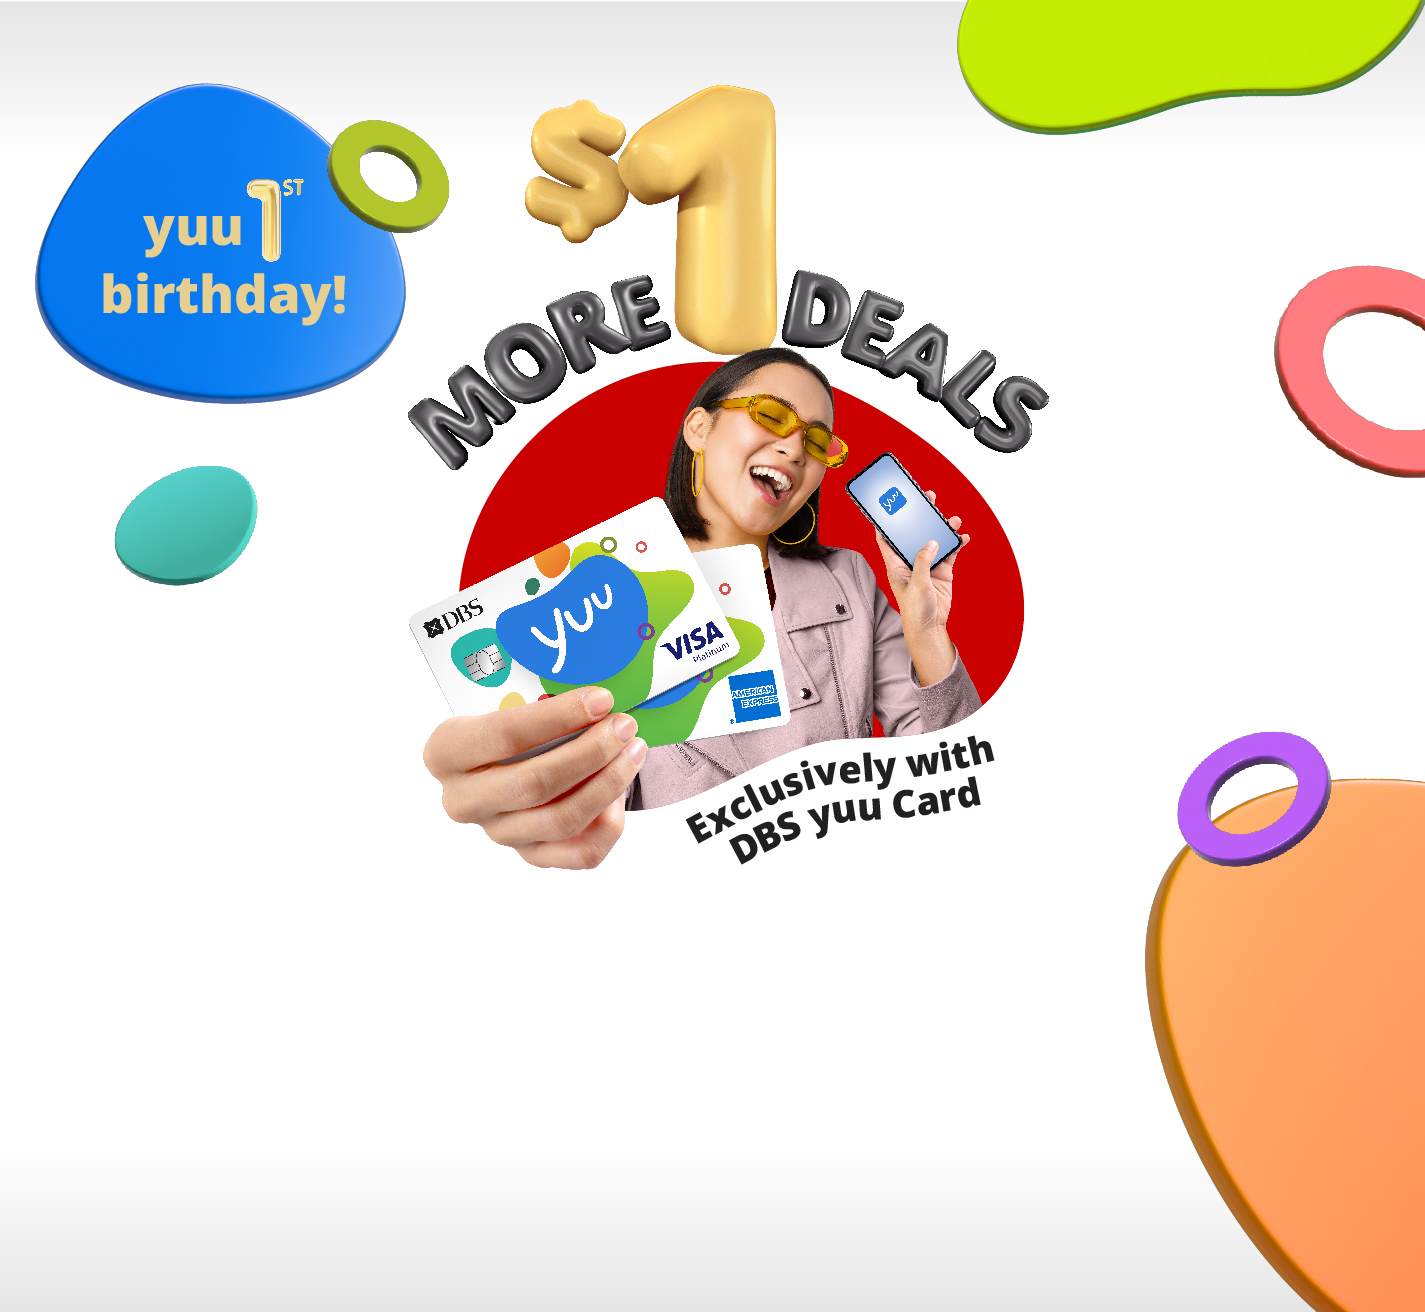 Celebrate with S$1 deals, exclusively with DBS yuu Card!